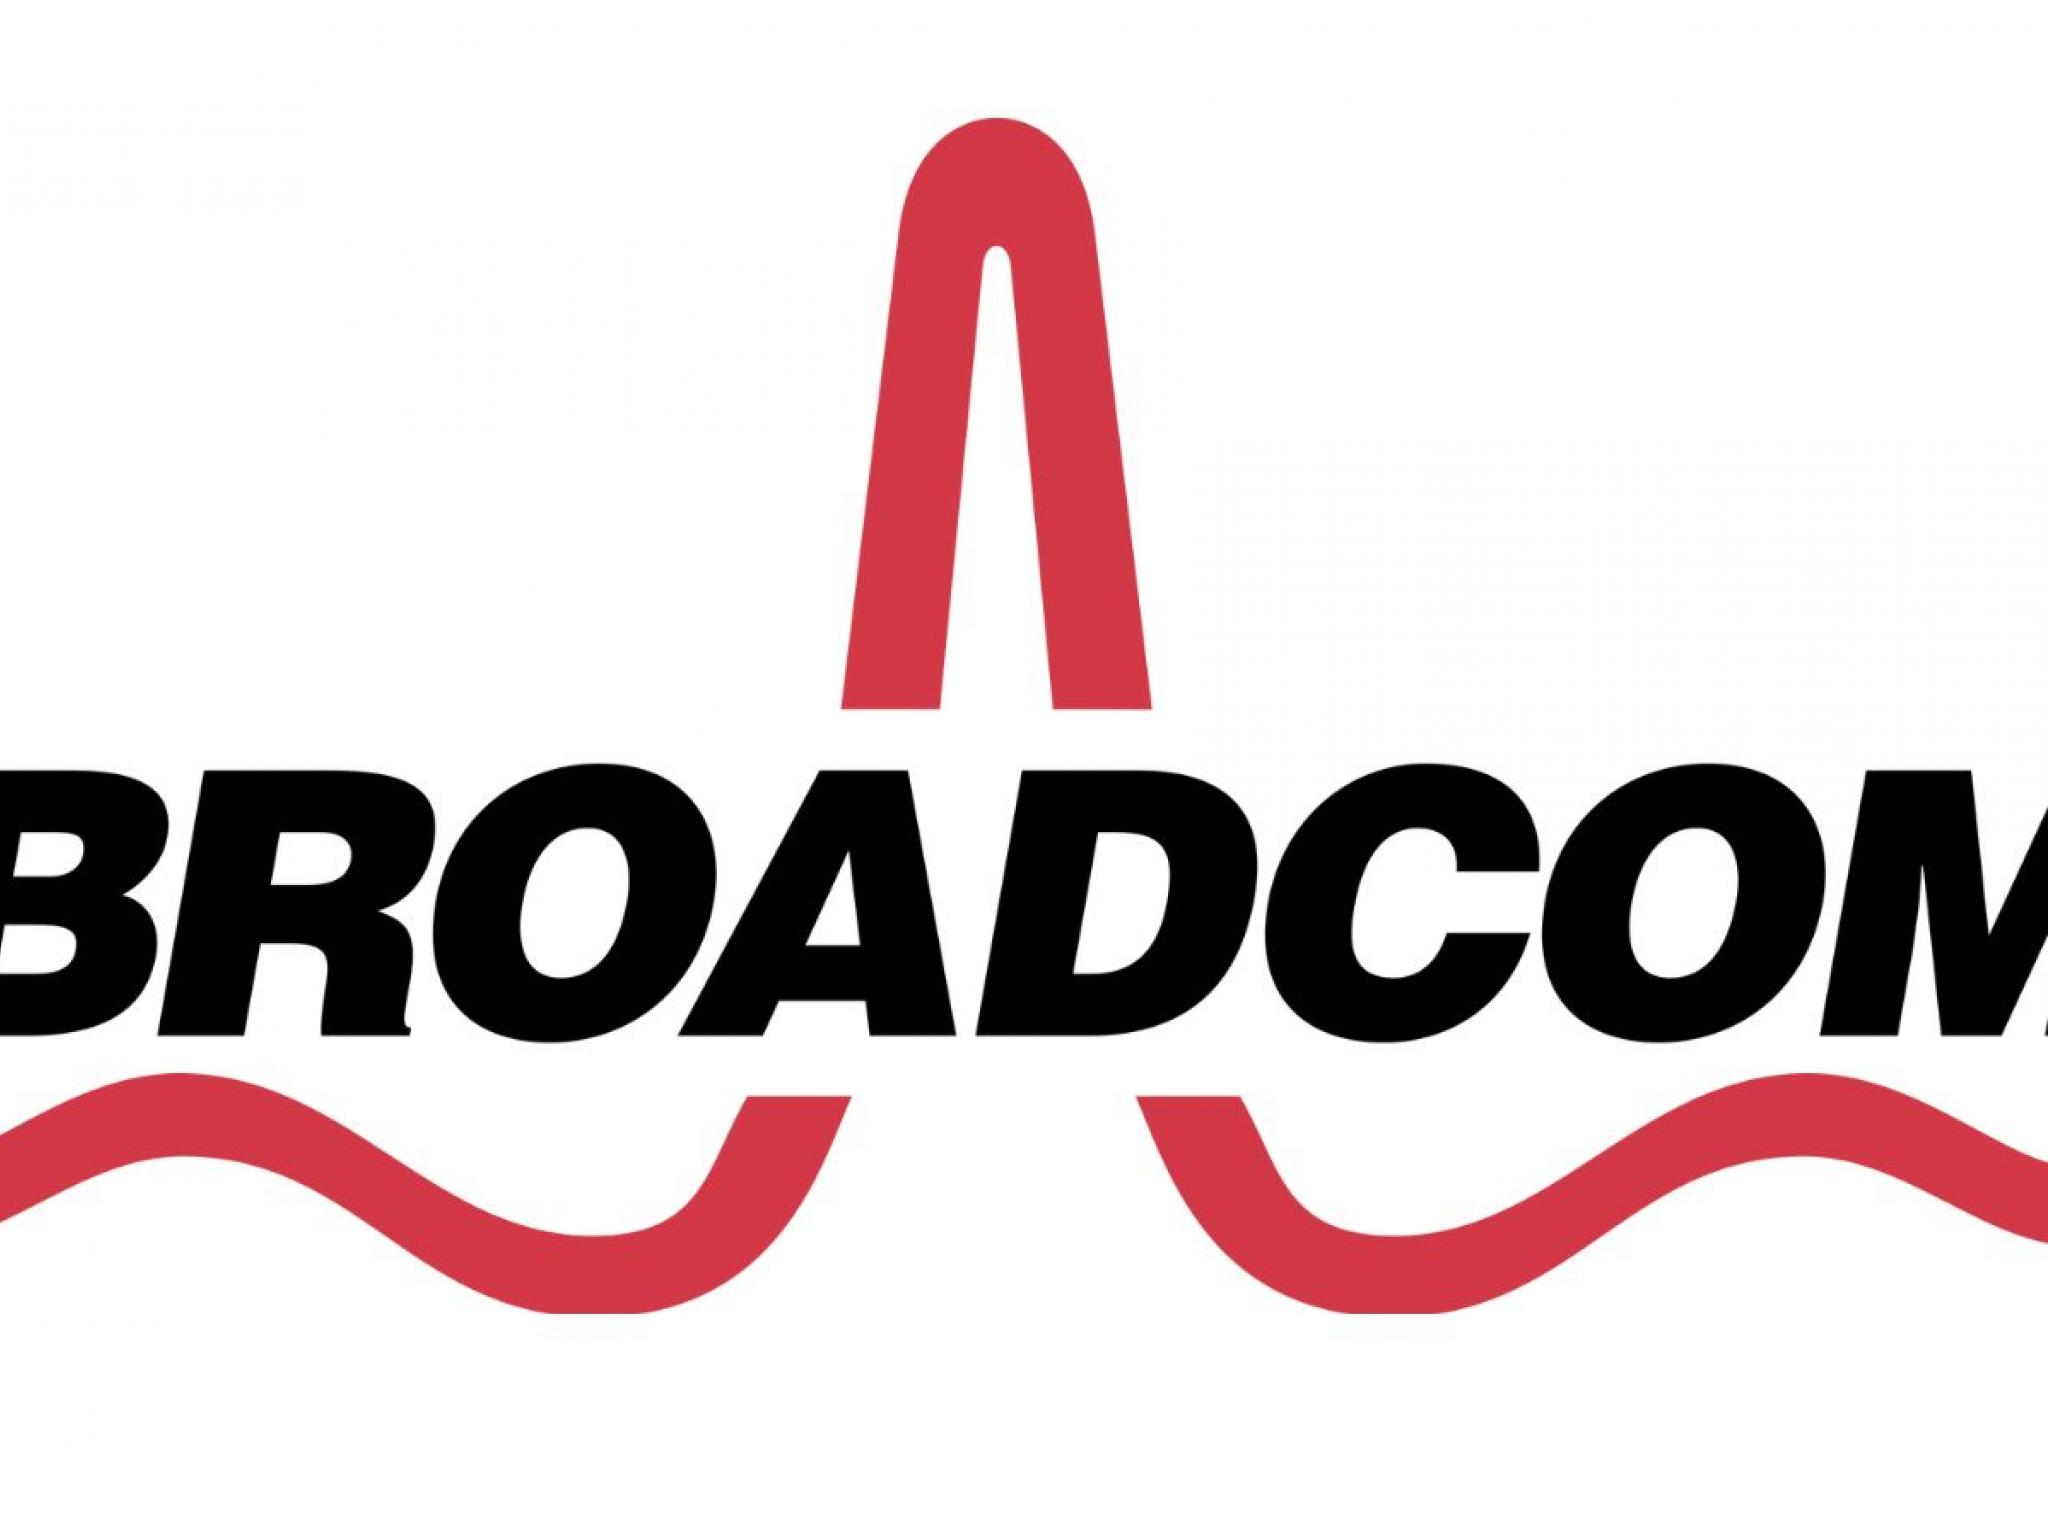  broadcom-to-rally-more-than-23-here-are-10-top-analyst-forecasts-for-friday 